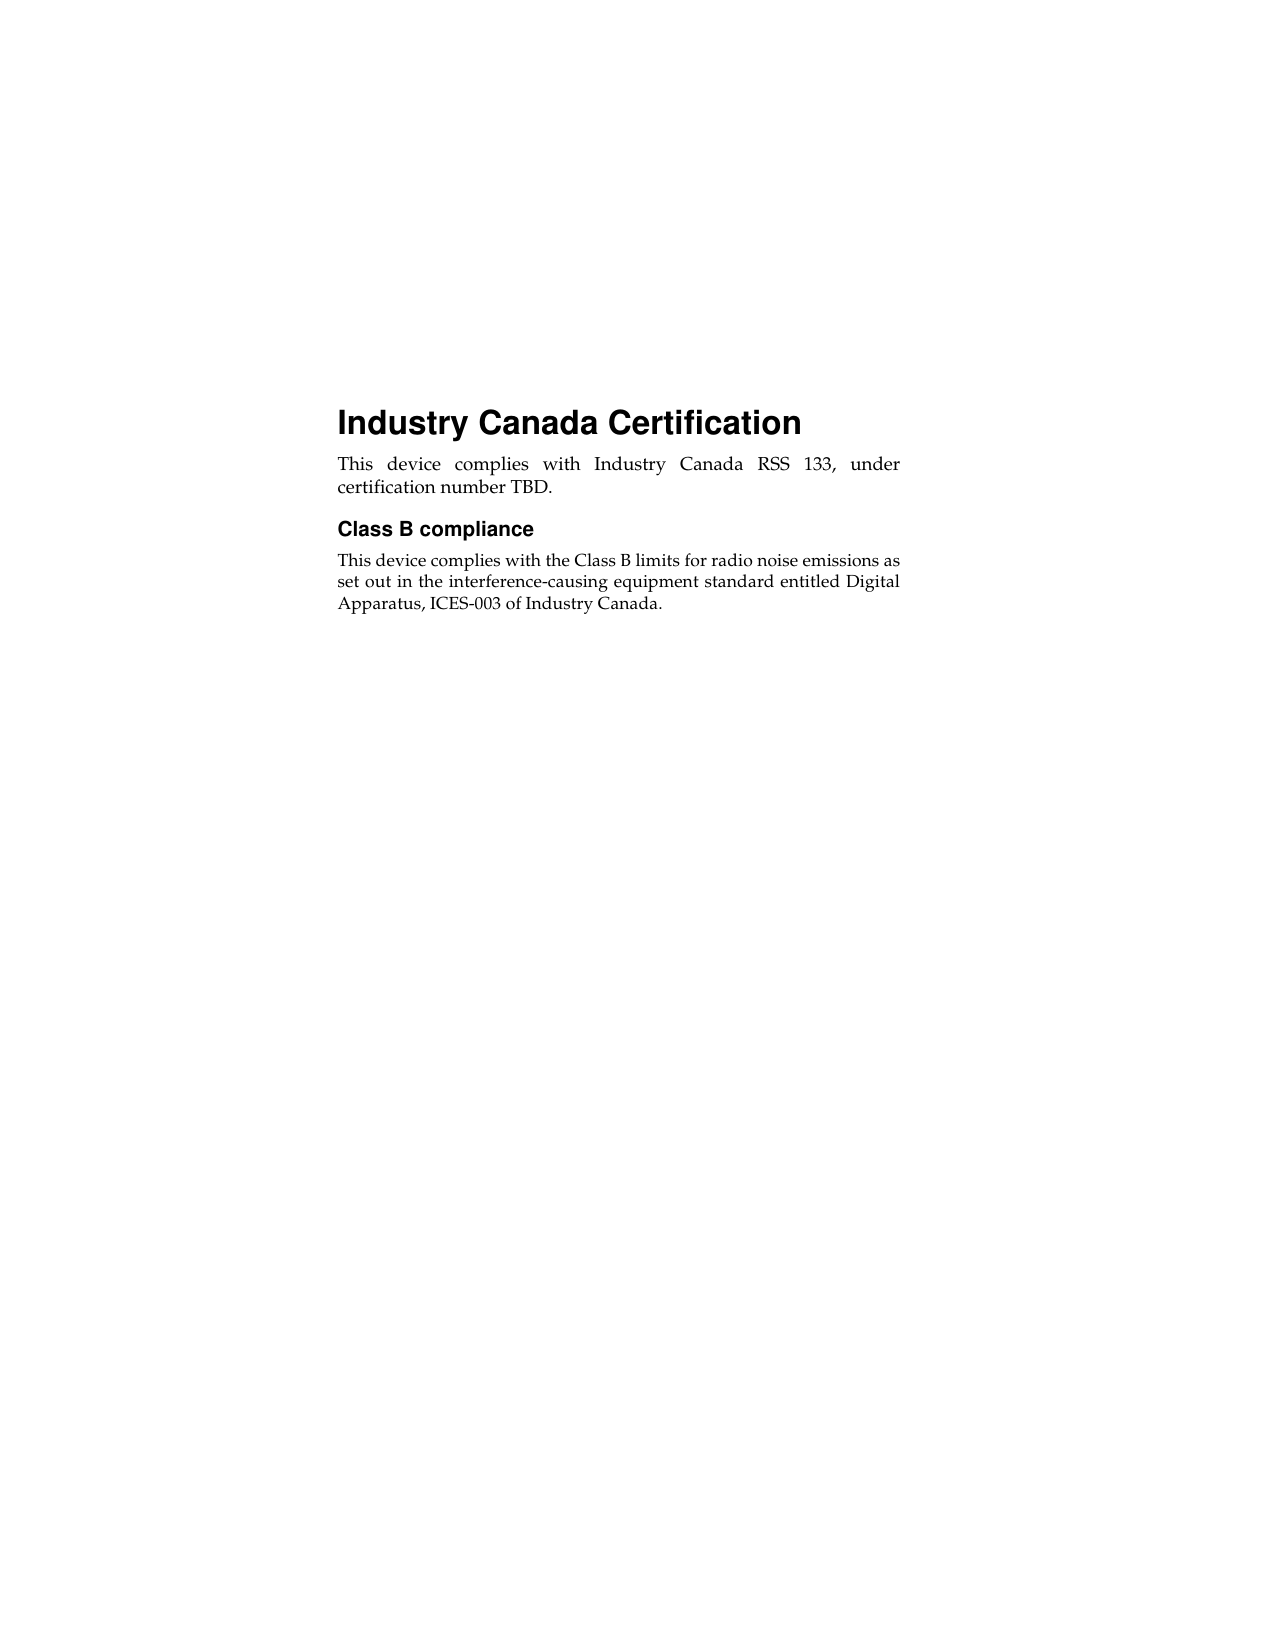 Industry Canada Certification This device complies with Industry Canada RSS 133, undercertification number TBD. Class B compliance This device complies with the Class B limits for radio noise emissions asset out in the interference-causing equipment standard entitled DigitalApparatus, ICES-003 of Industry Canada. 